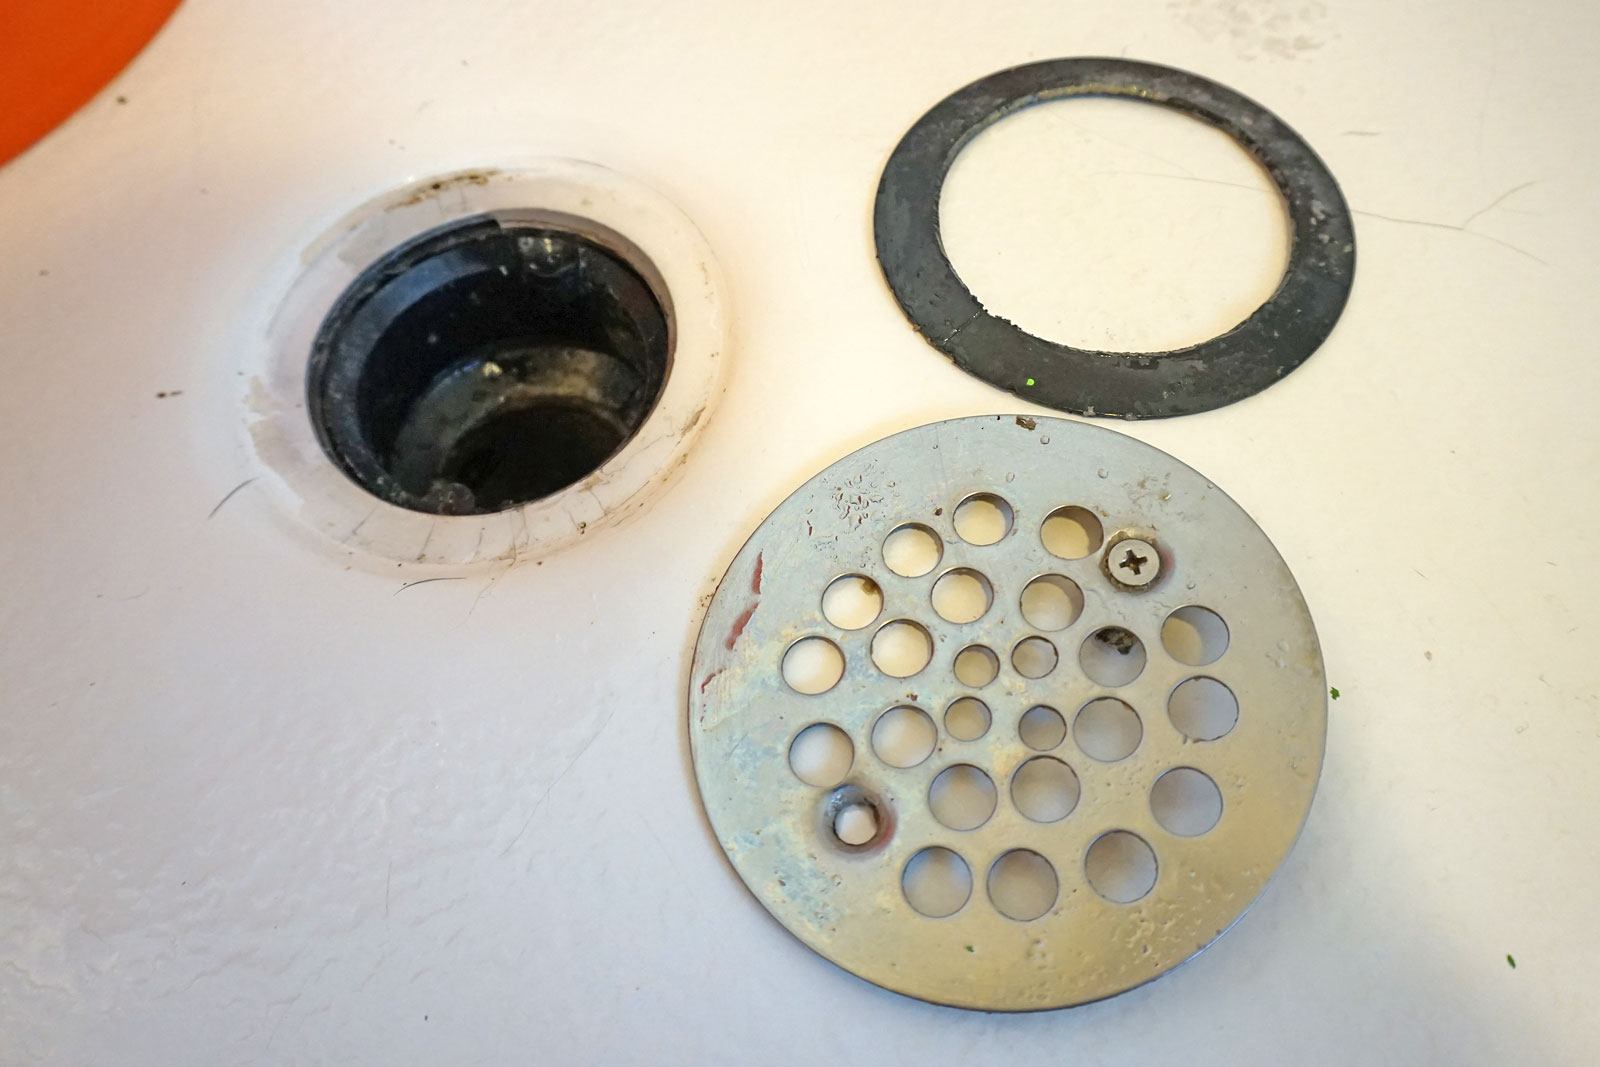 Shower drain removal help -  Community Forums